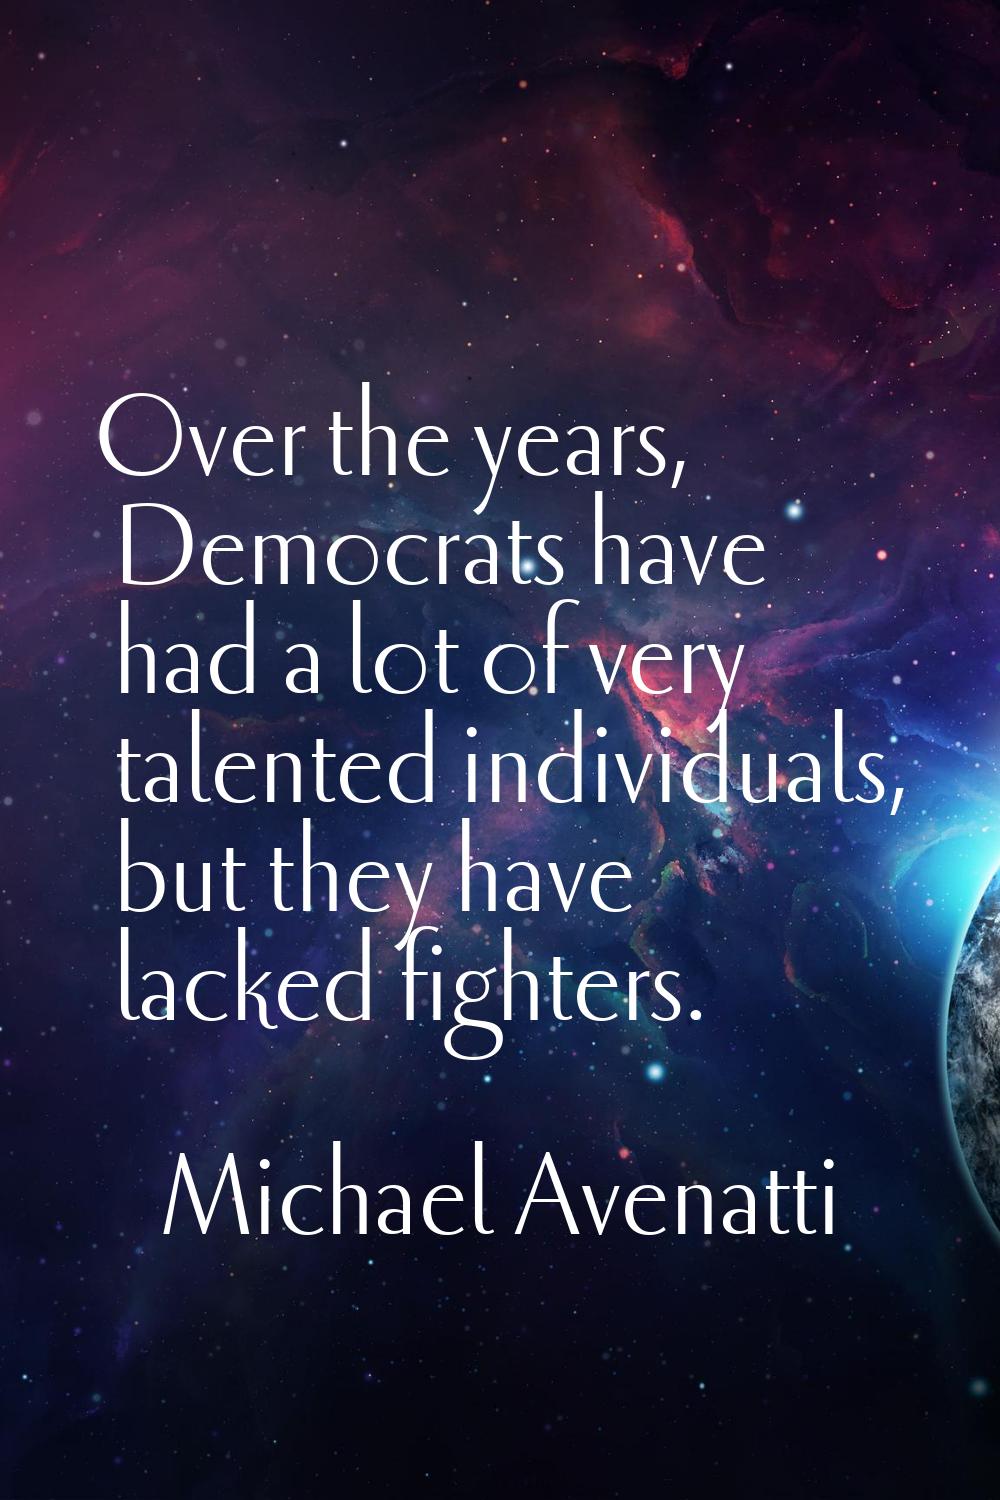 Over the years, Democrats have had a lot of very talented individuals, but they have lacked fighter